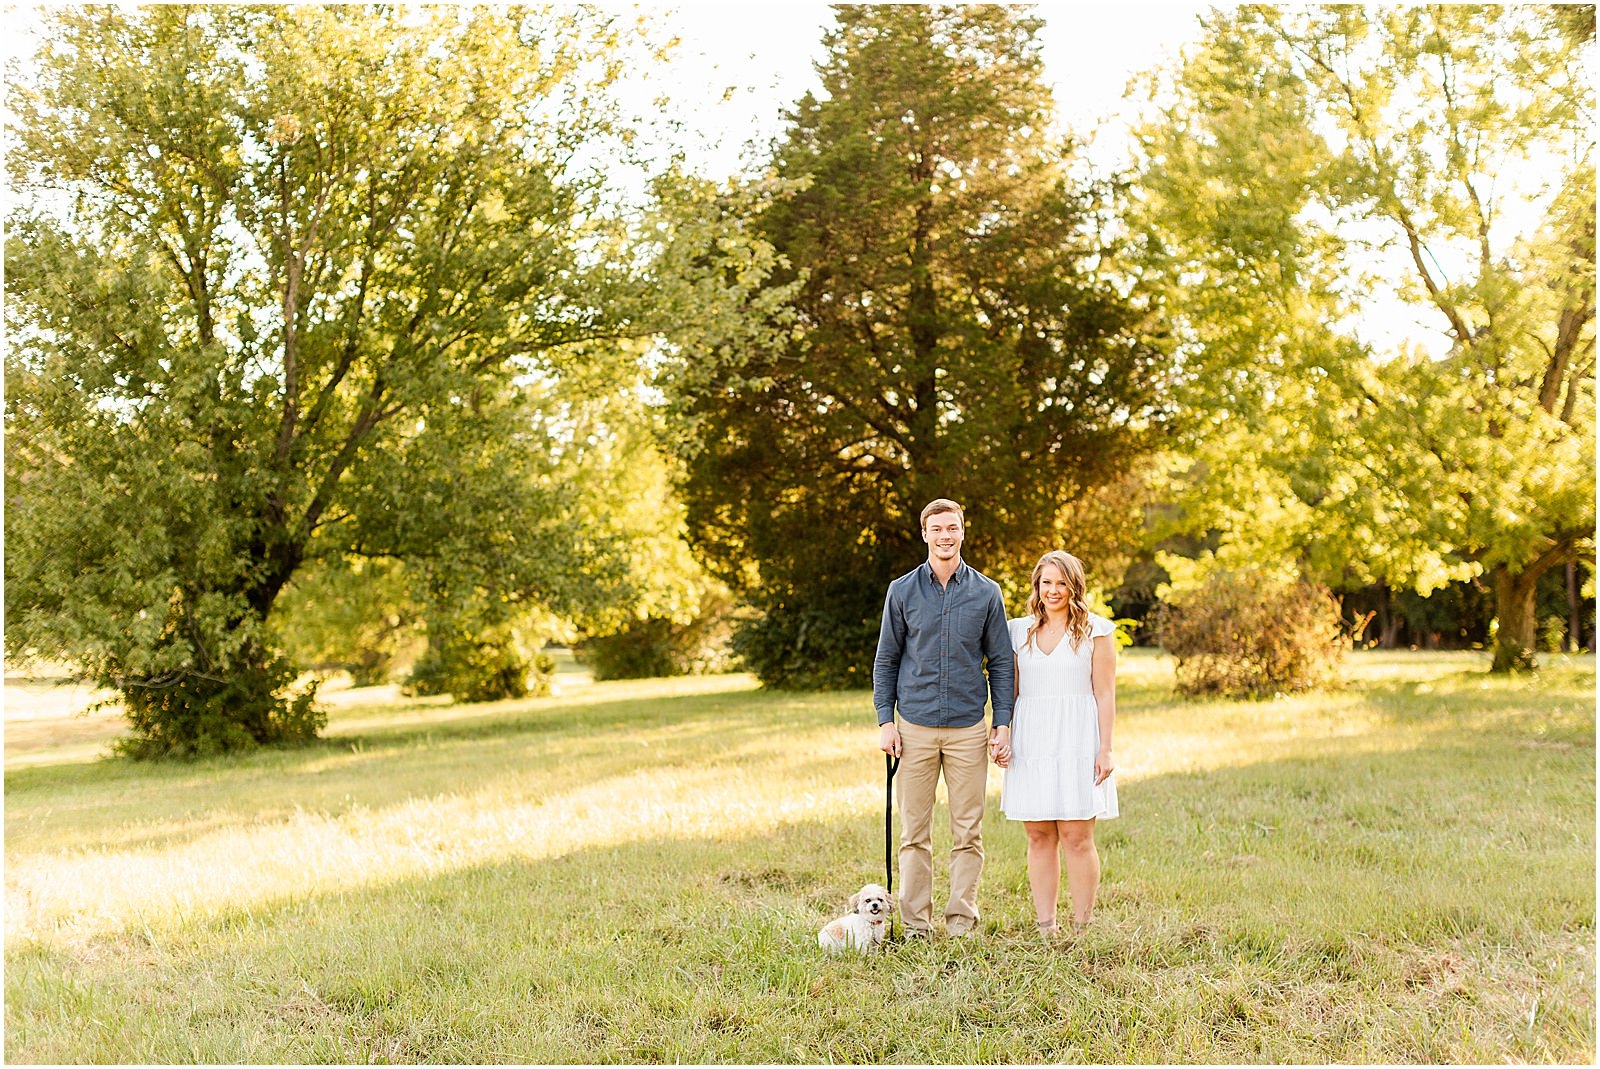 Nicole and Clark's Engagement Session at The Jasper Parklands Bret and Brandie Photography0010.jpg